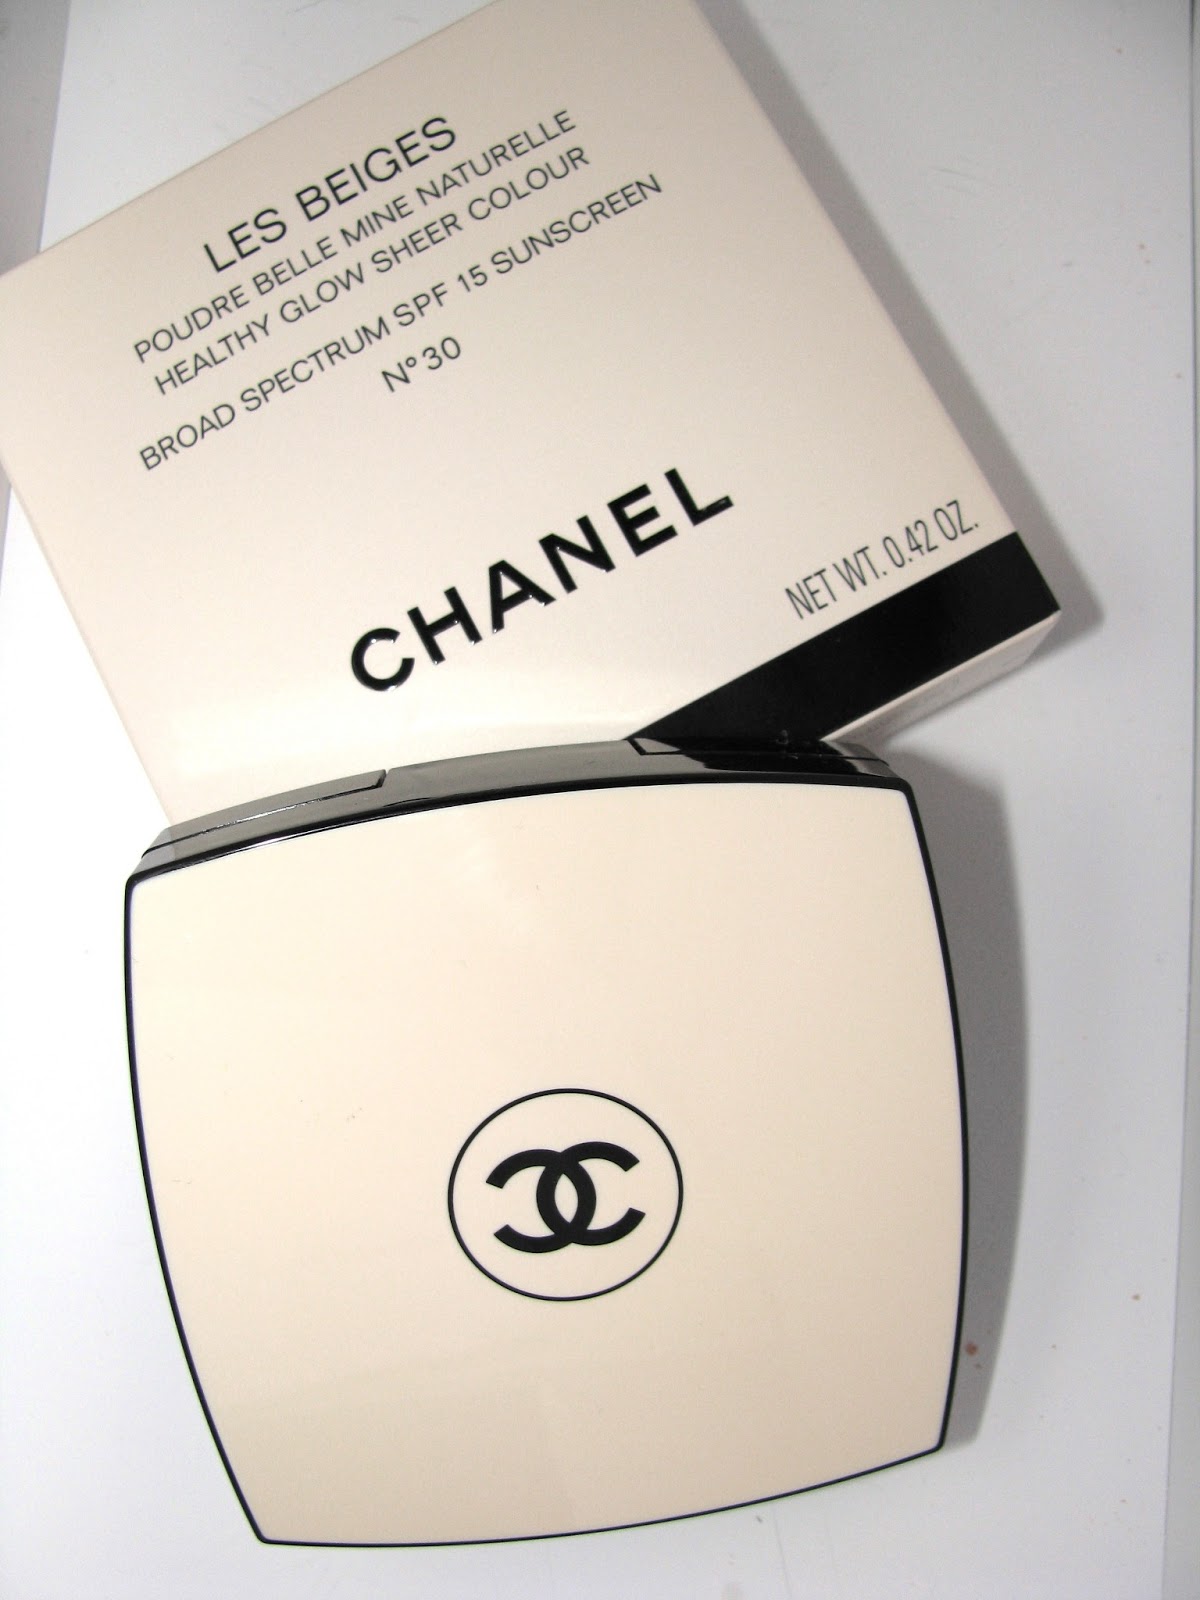 Chanel Les Beiges Healthy Glow Sheer Colour SPF 15 Powders N° 20